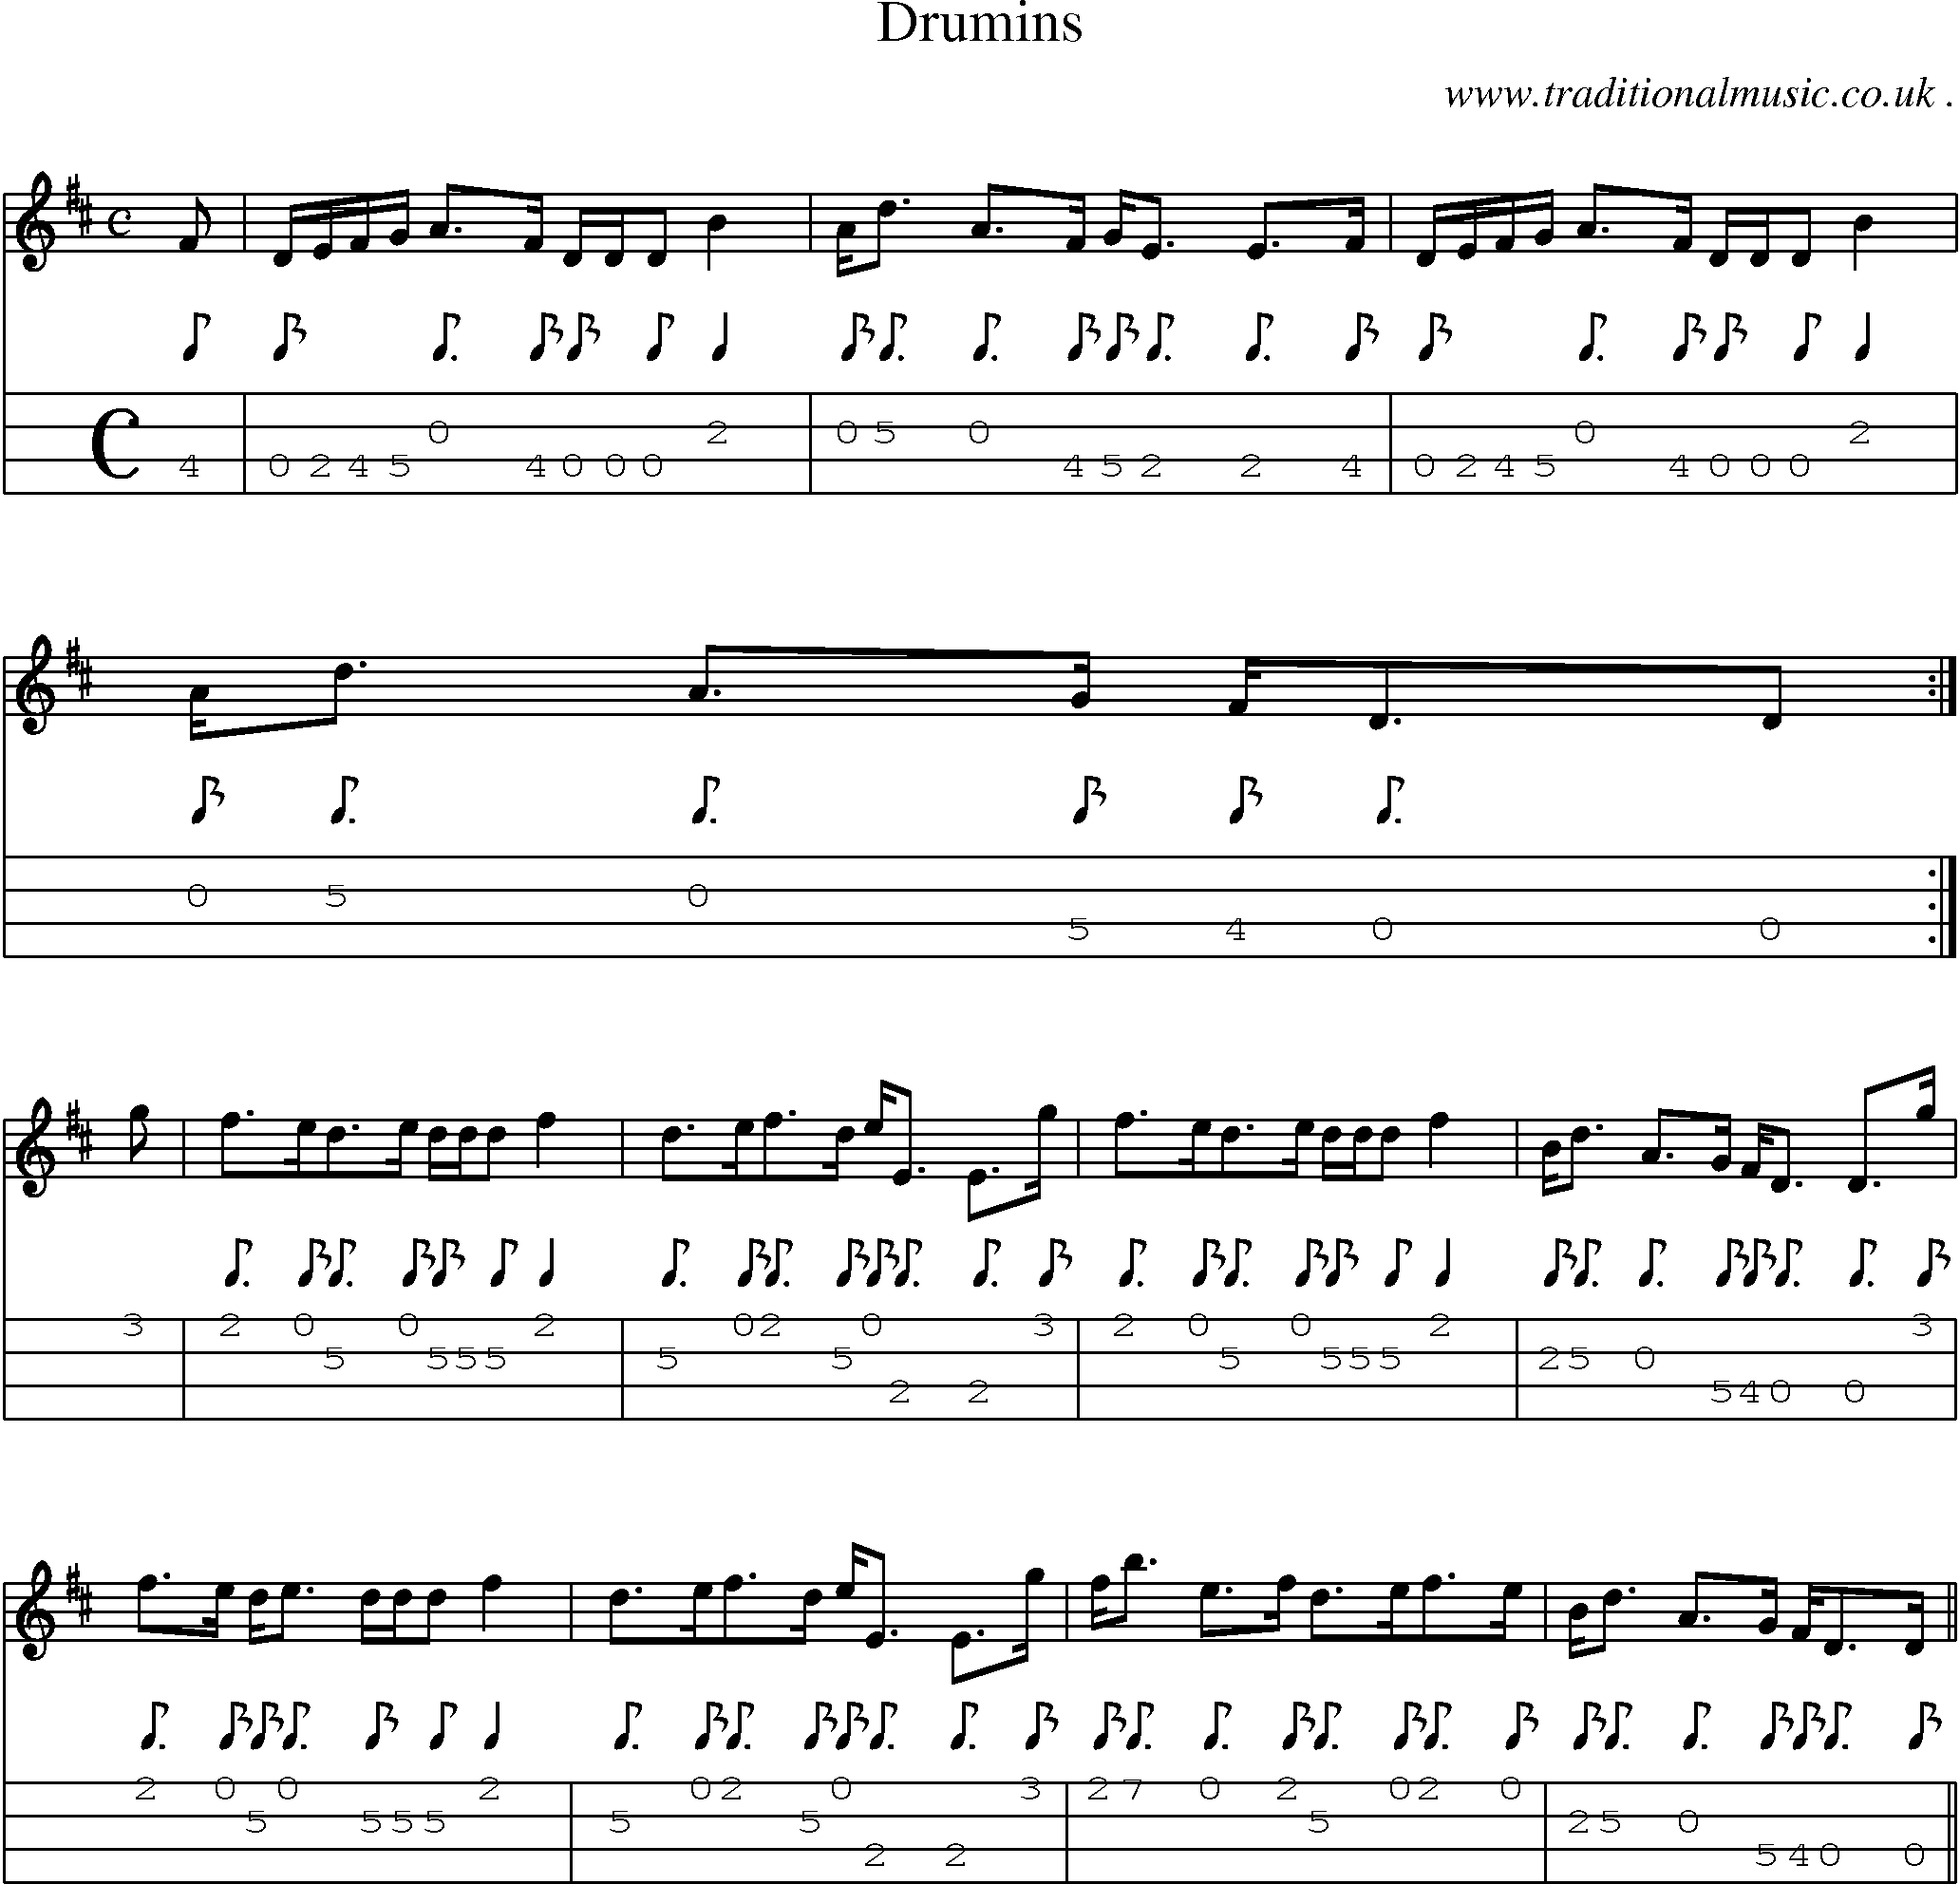 Sheet-music  score, Chords and Mandolin Tabs for Drumins